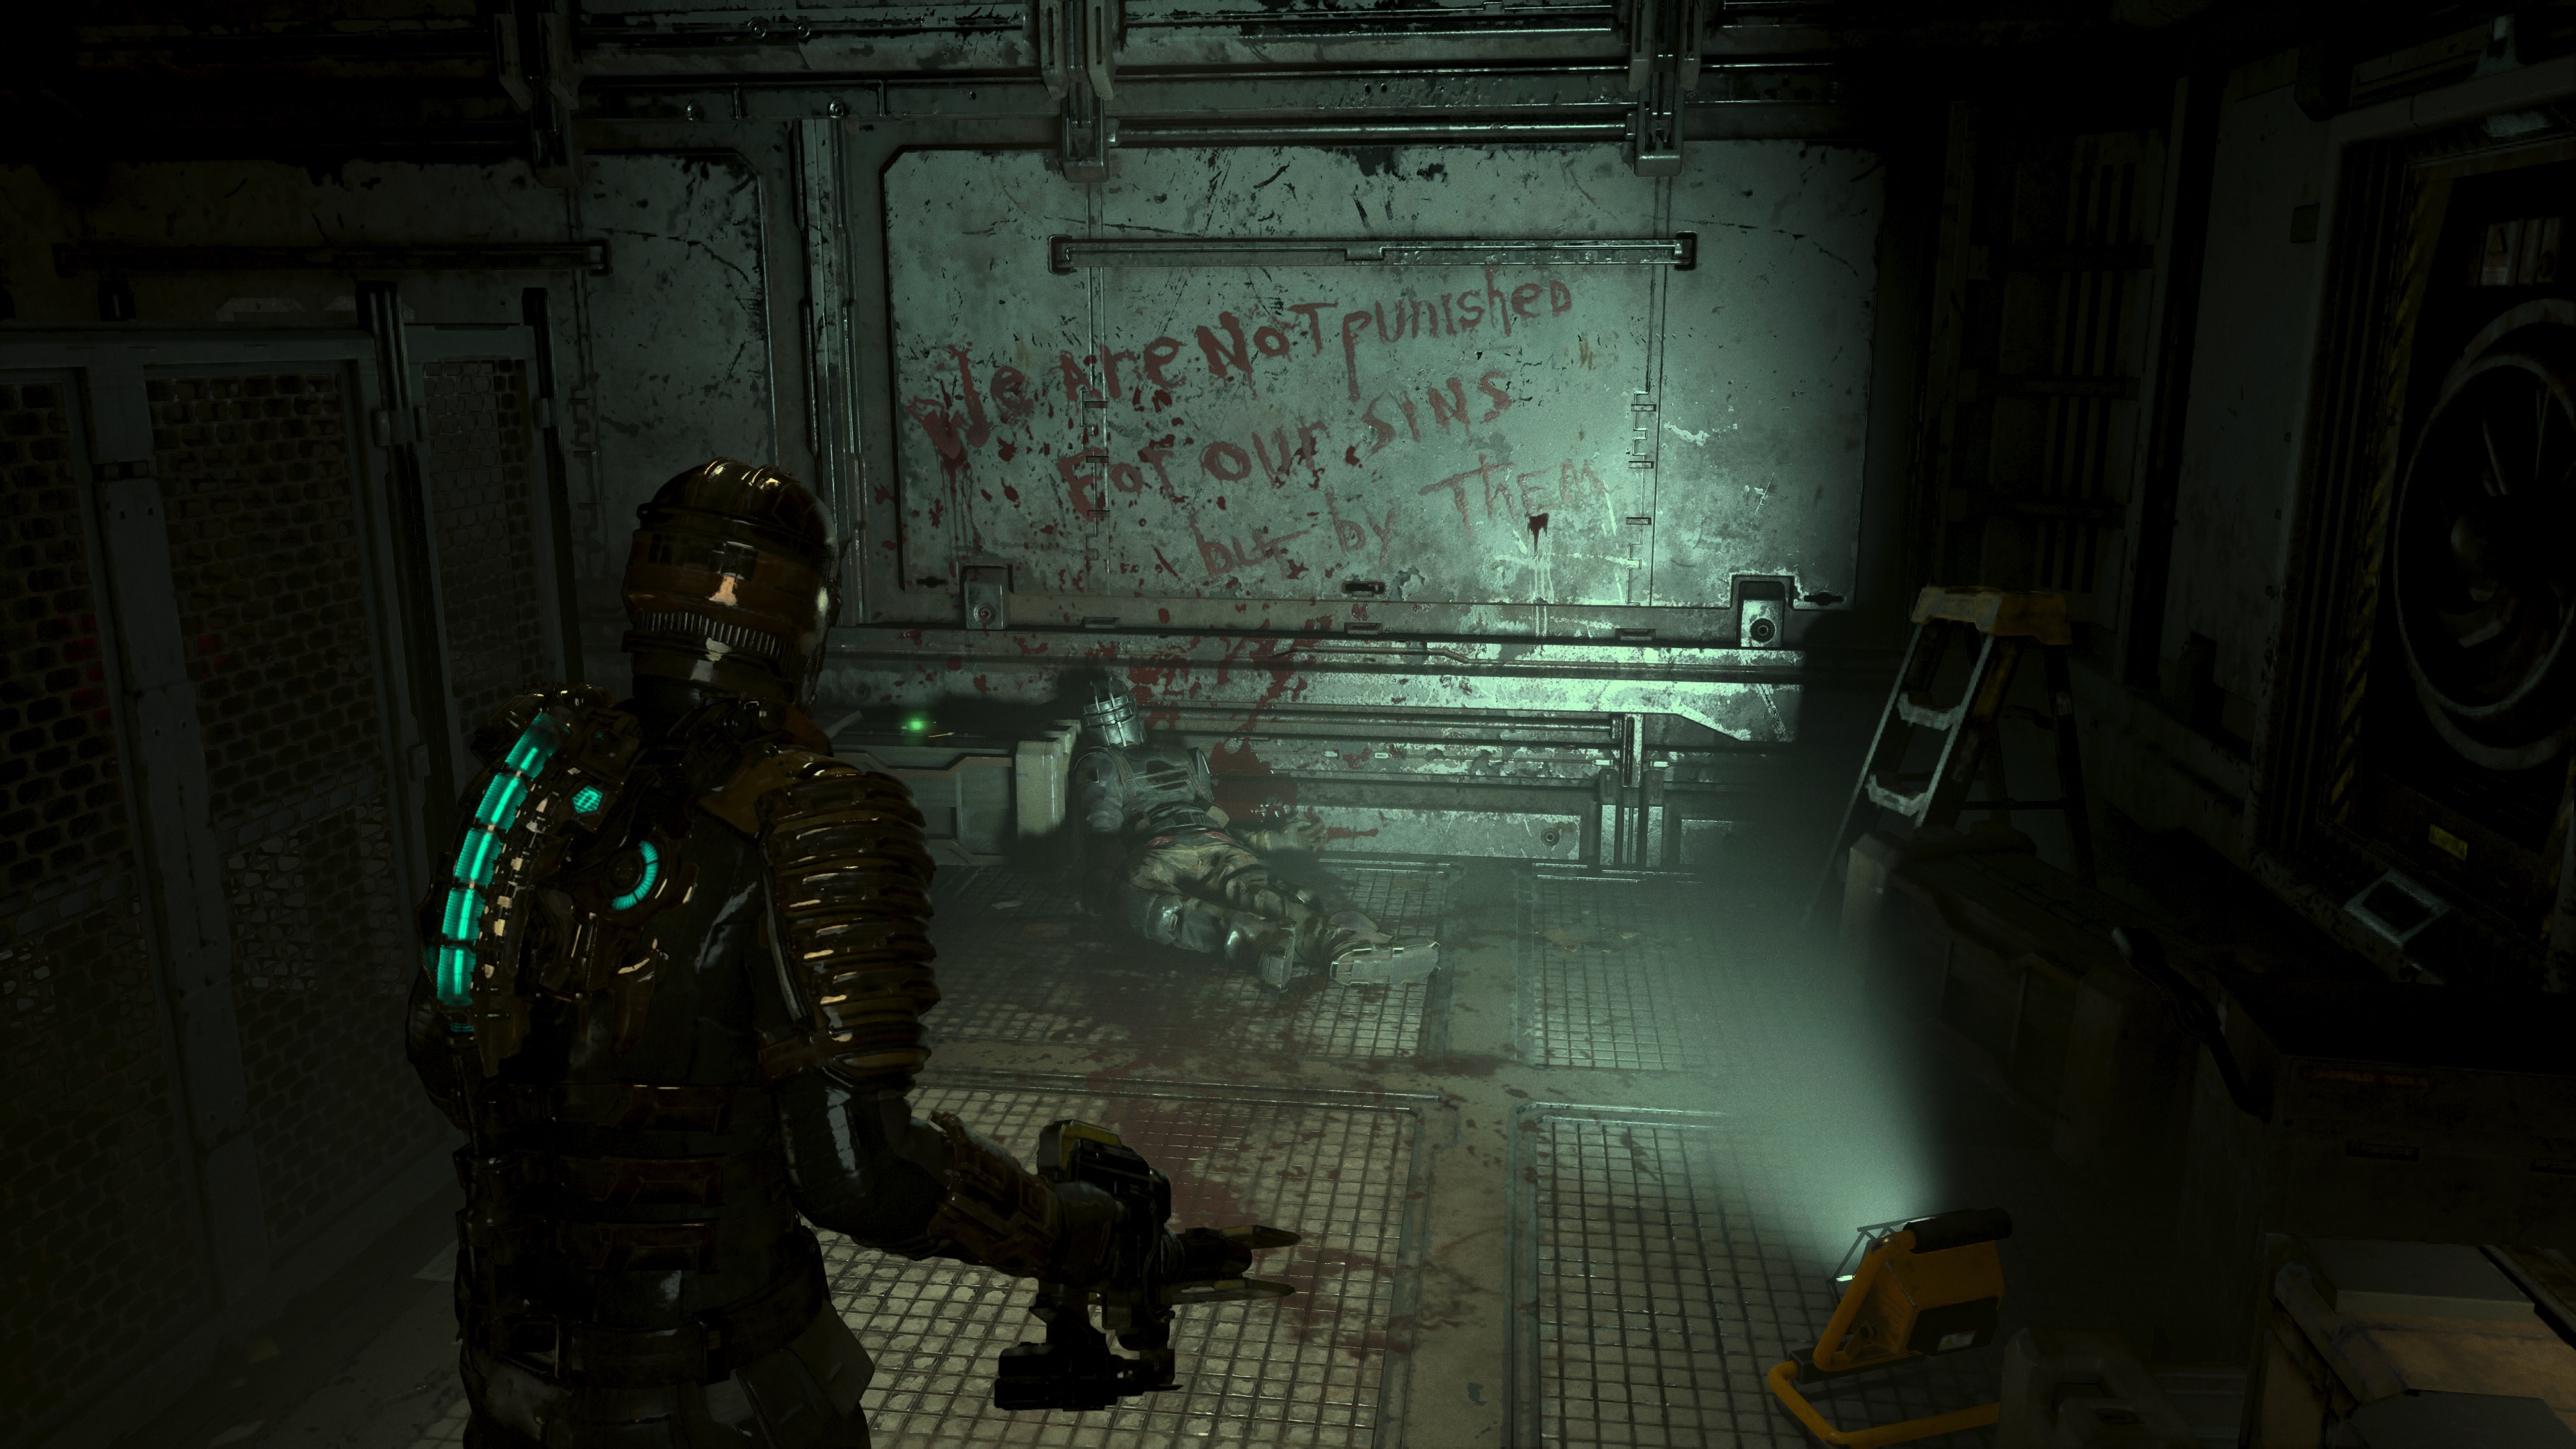 Dead Space remake review: One of the best horror games is made whole again